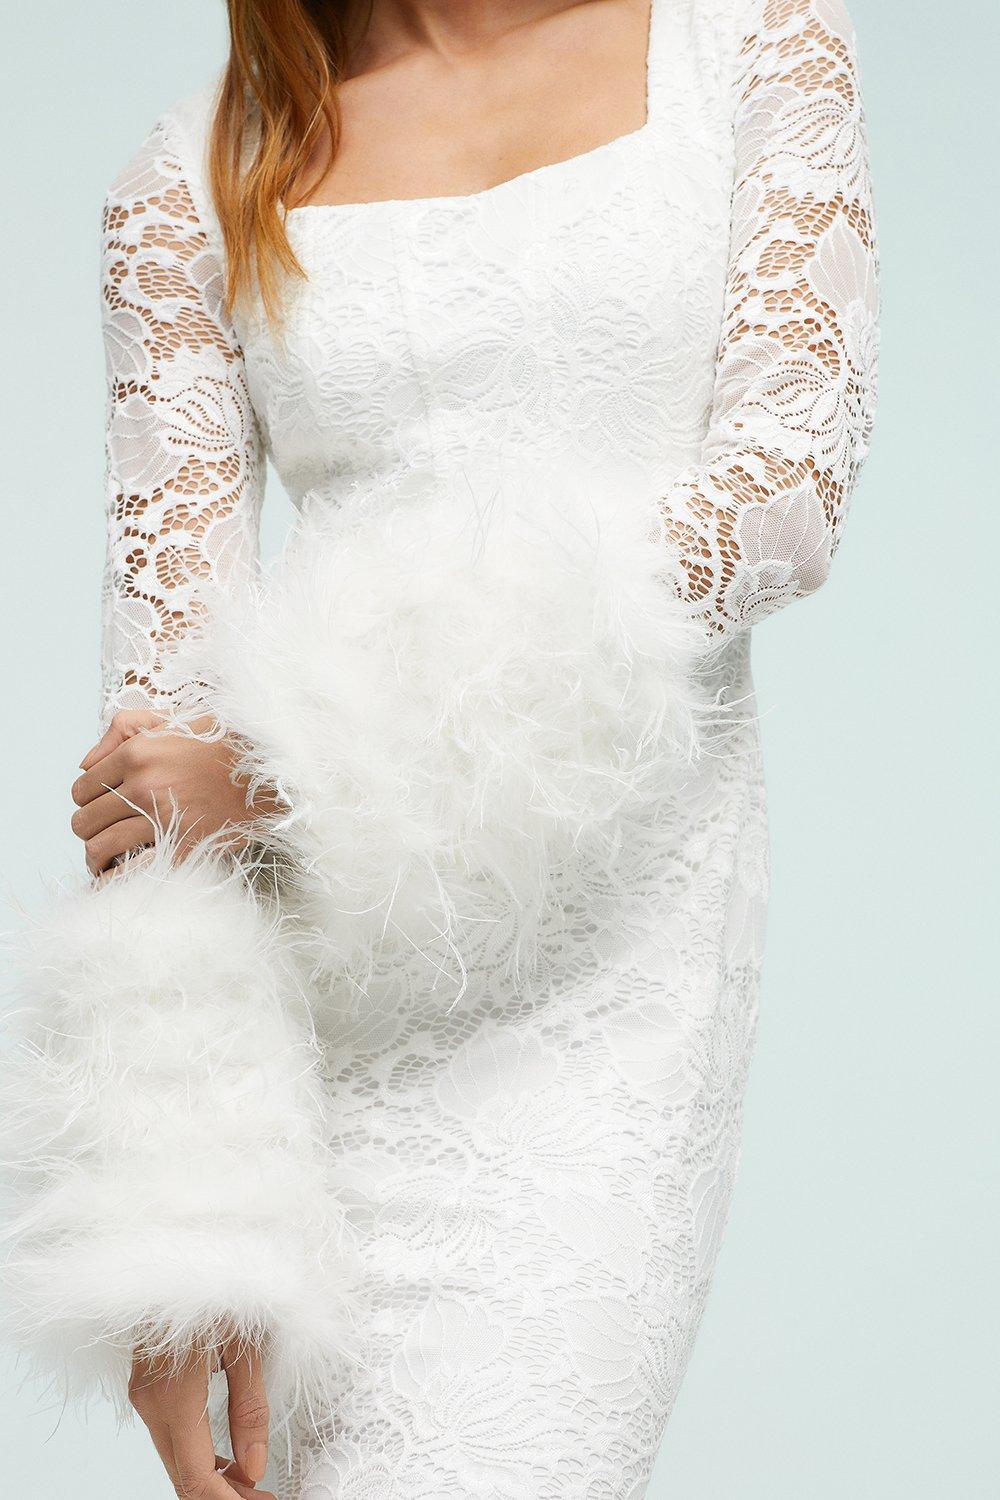 Feather Sleeves - Ivory